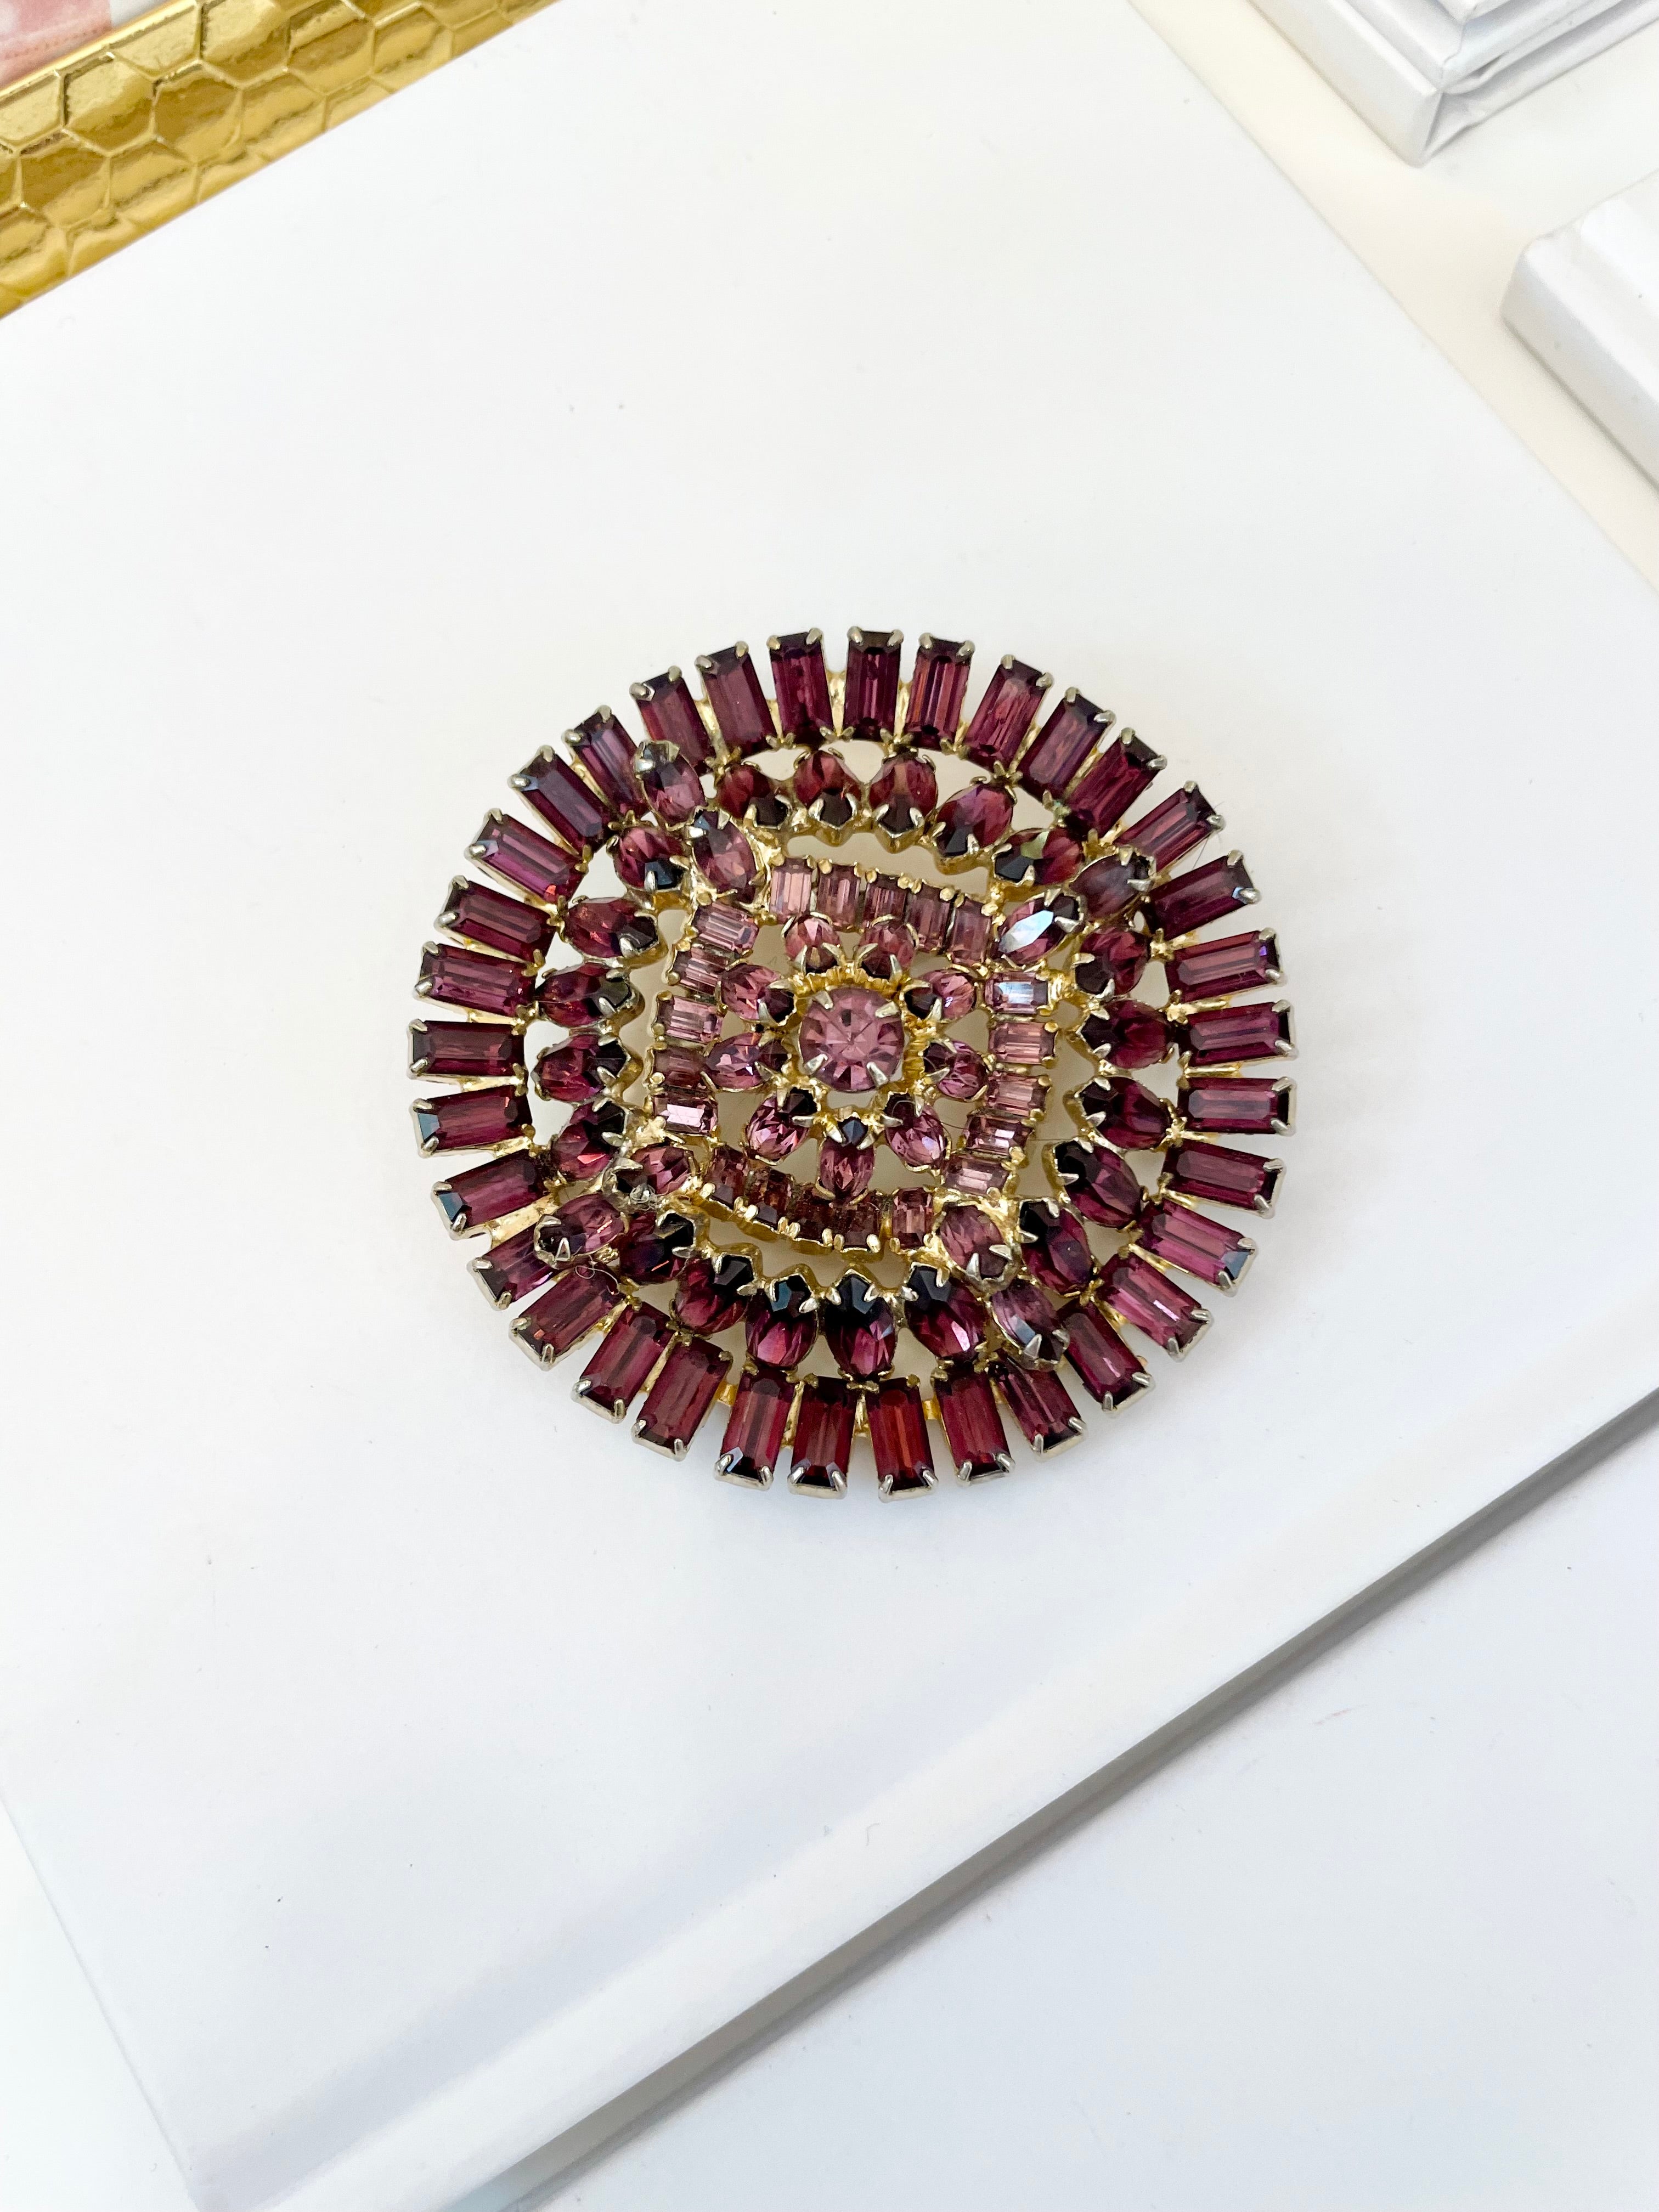 The lady can't say no to a beautiful brooch! This one is stunning..